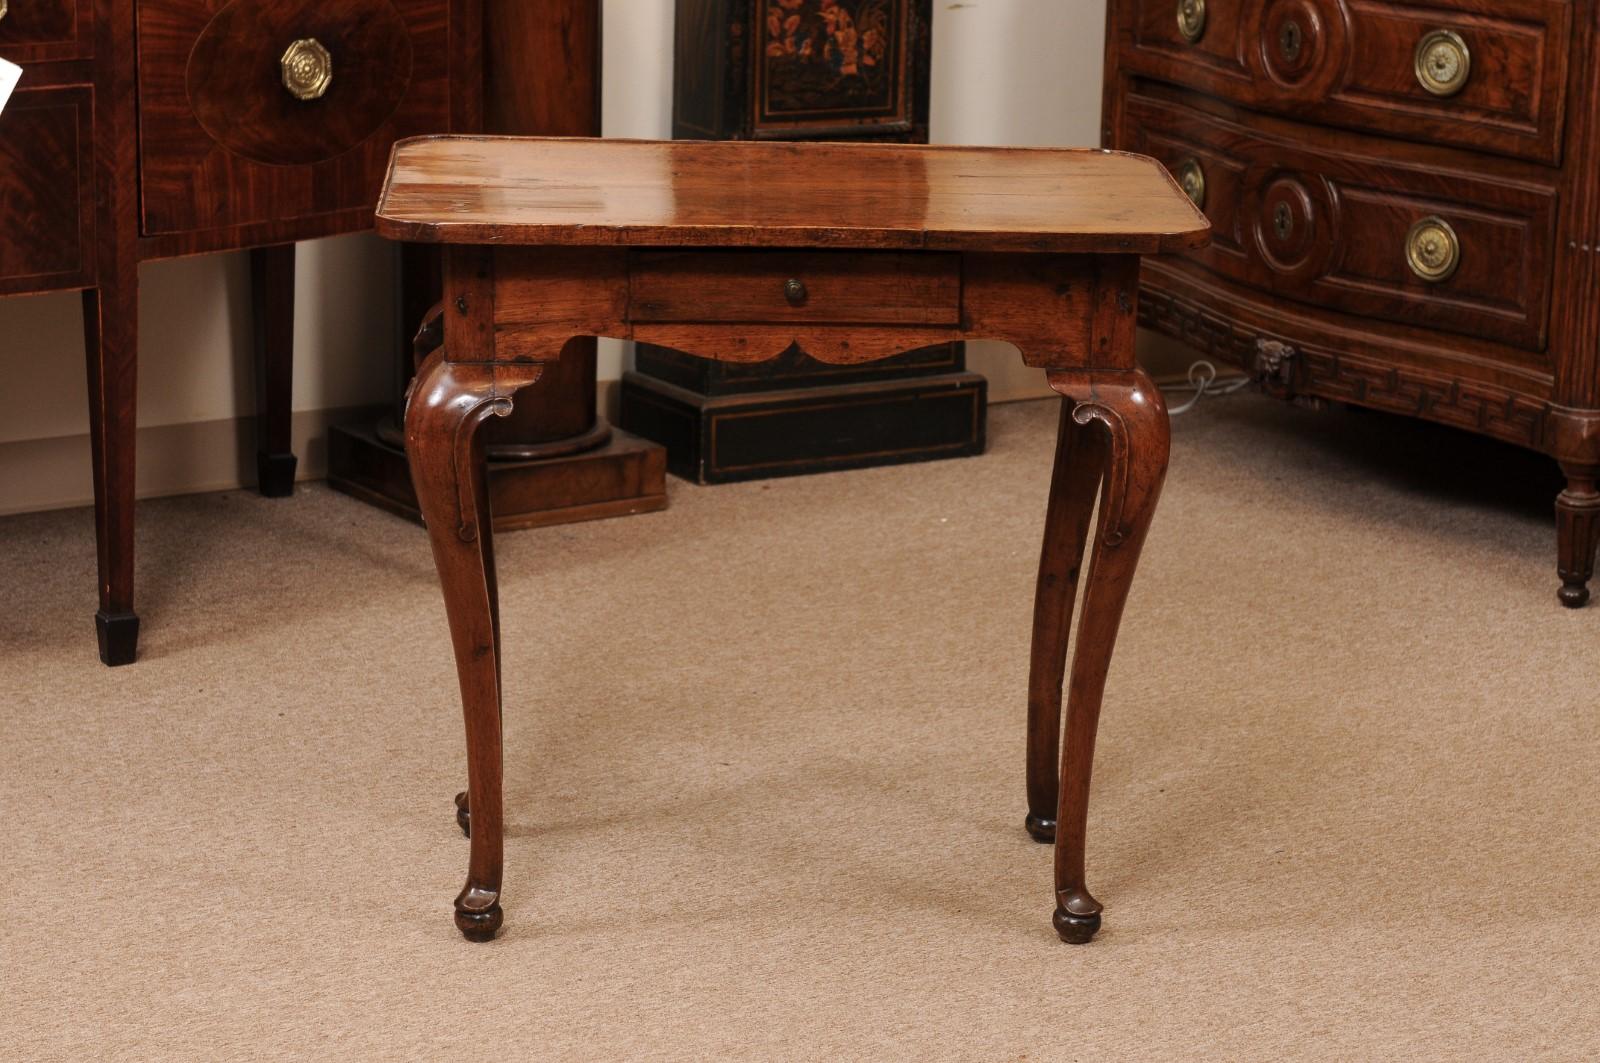 Early 18th Century Italian Walnut Side Table with Tray Top, Drawer, Cabriole Leg For Sale 8